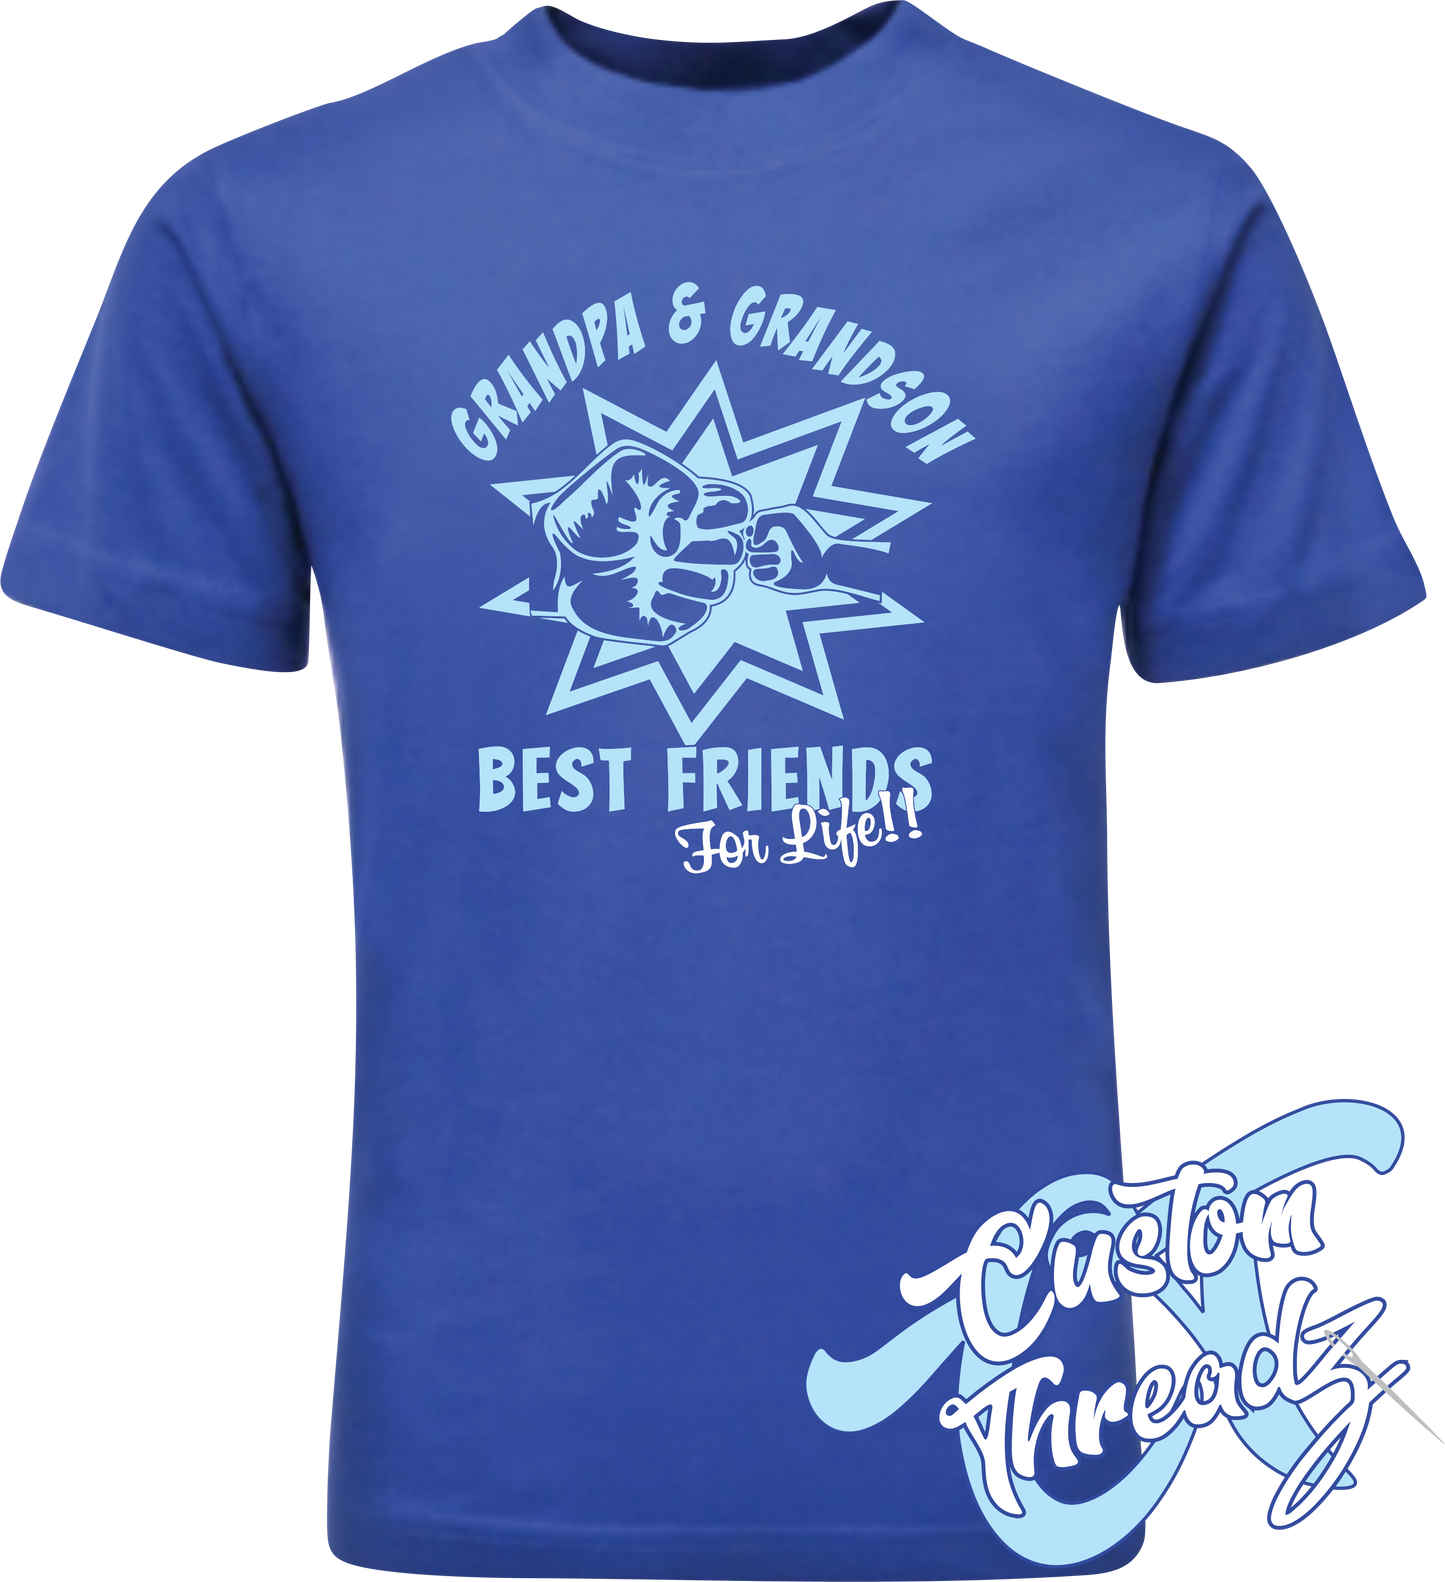 royal blue tee with grandpa and grandson best friends fist pound DTG printed design